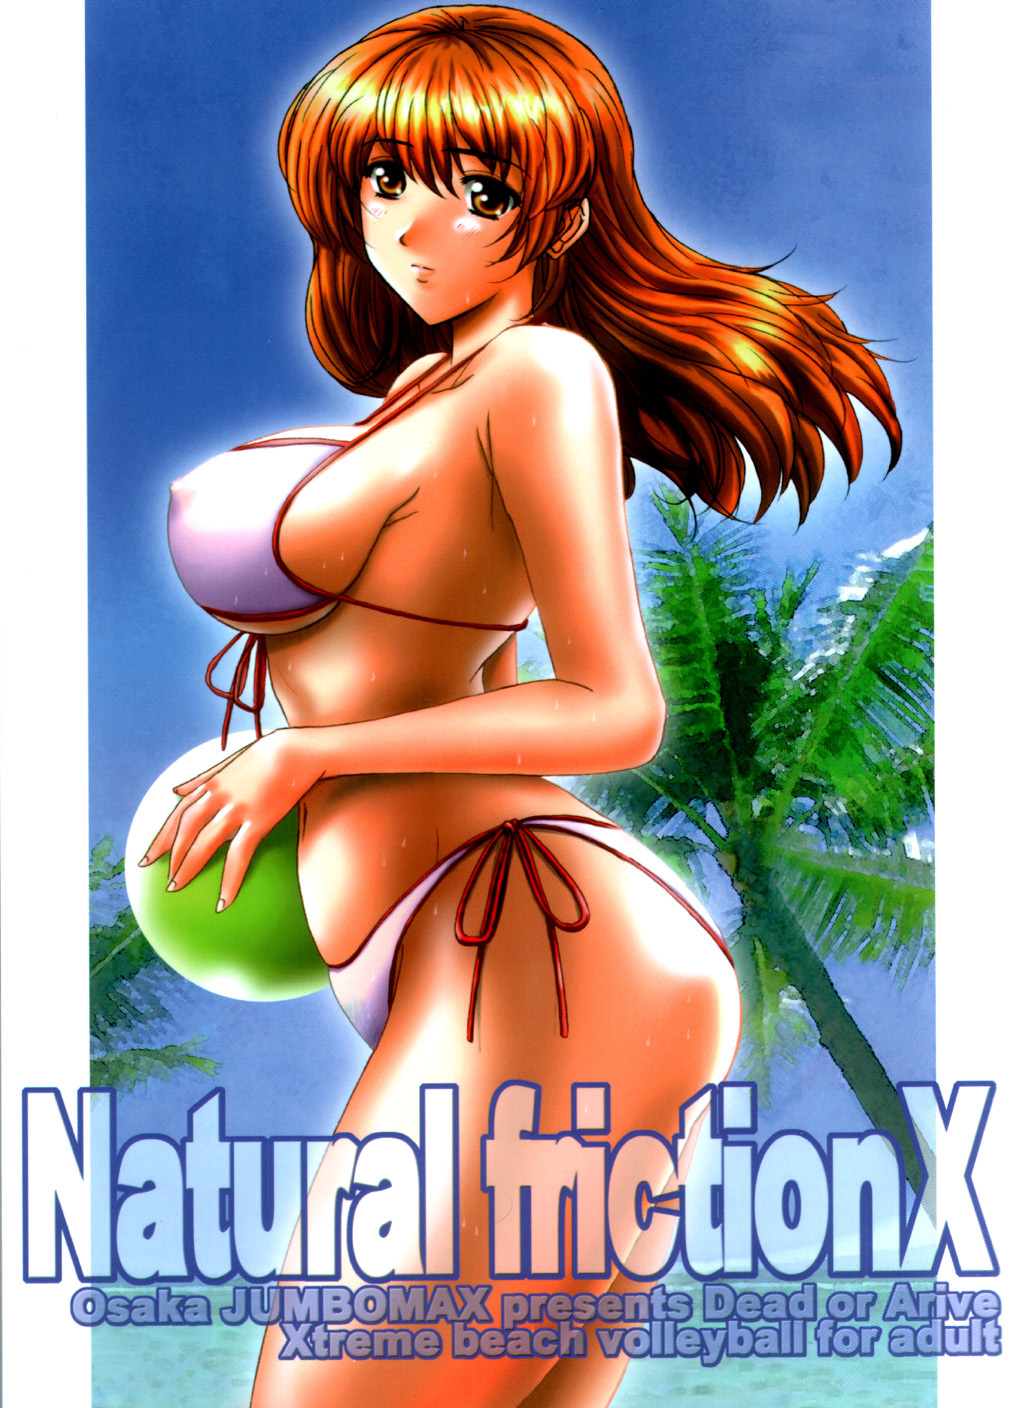 (C63) [JUMBOMAX (Ishihara Souka)] Natural Friction X (Dead or Alive) page 1 full